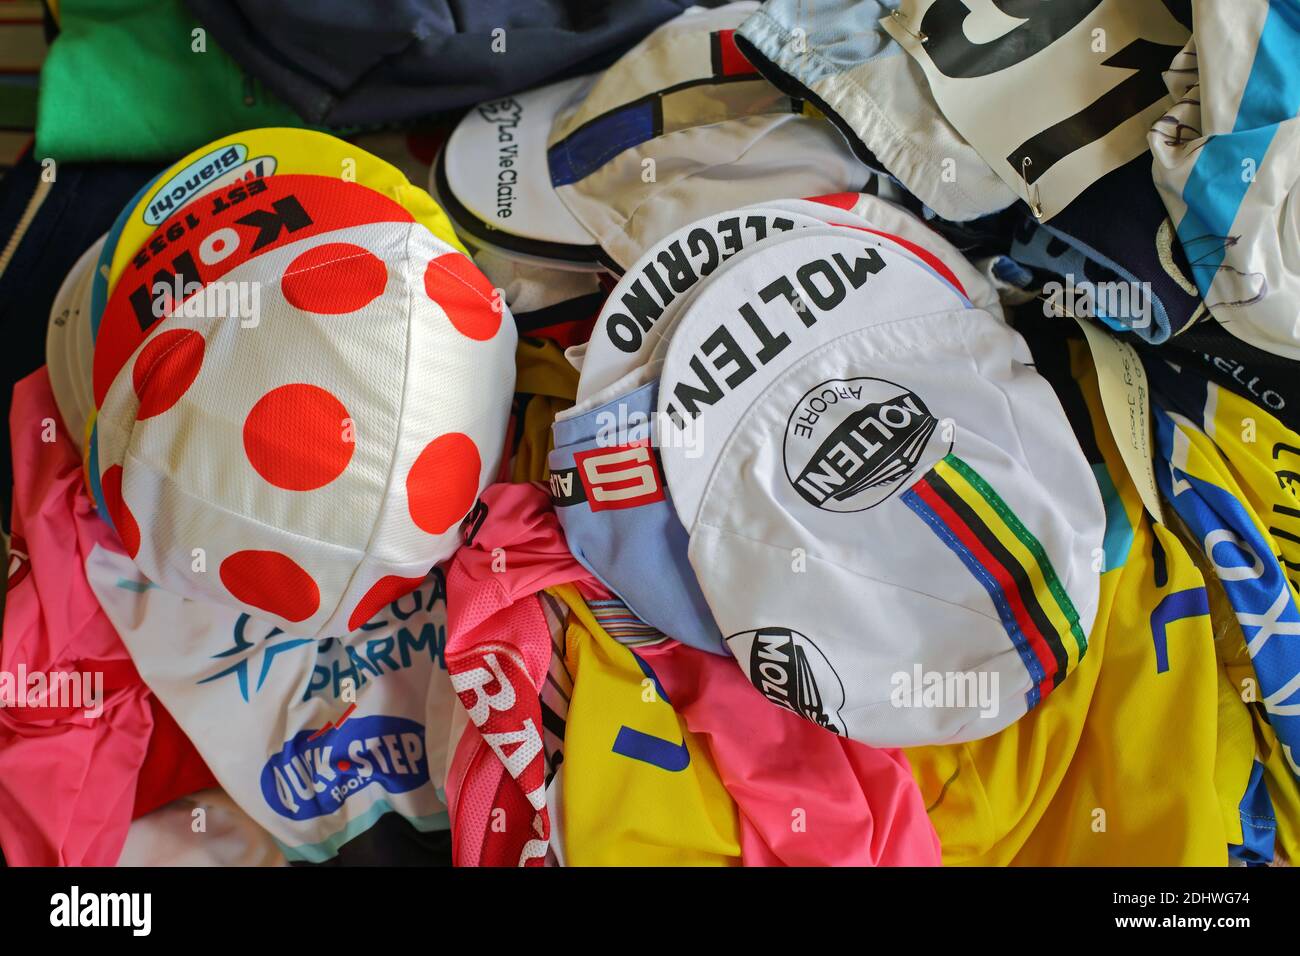 United Kingdom / London /Paul Smith collection of cycling jersey's and cap's  Stock Photo - Alamy